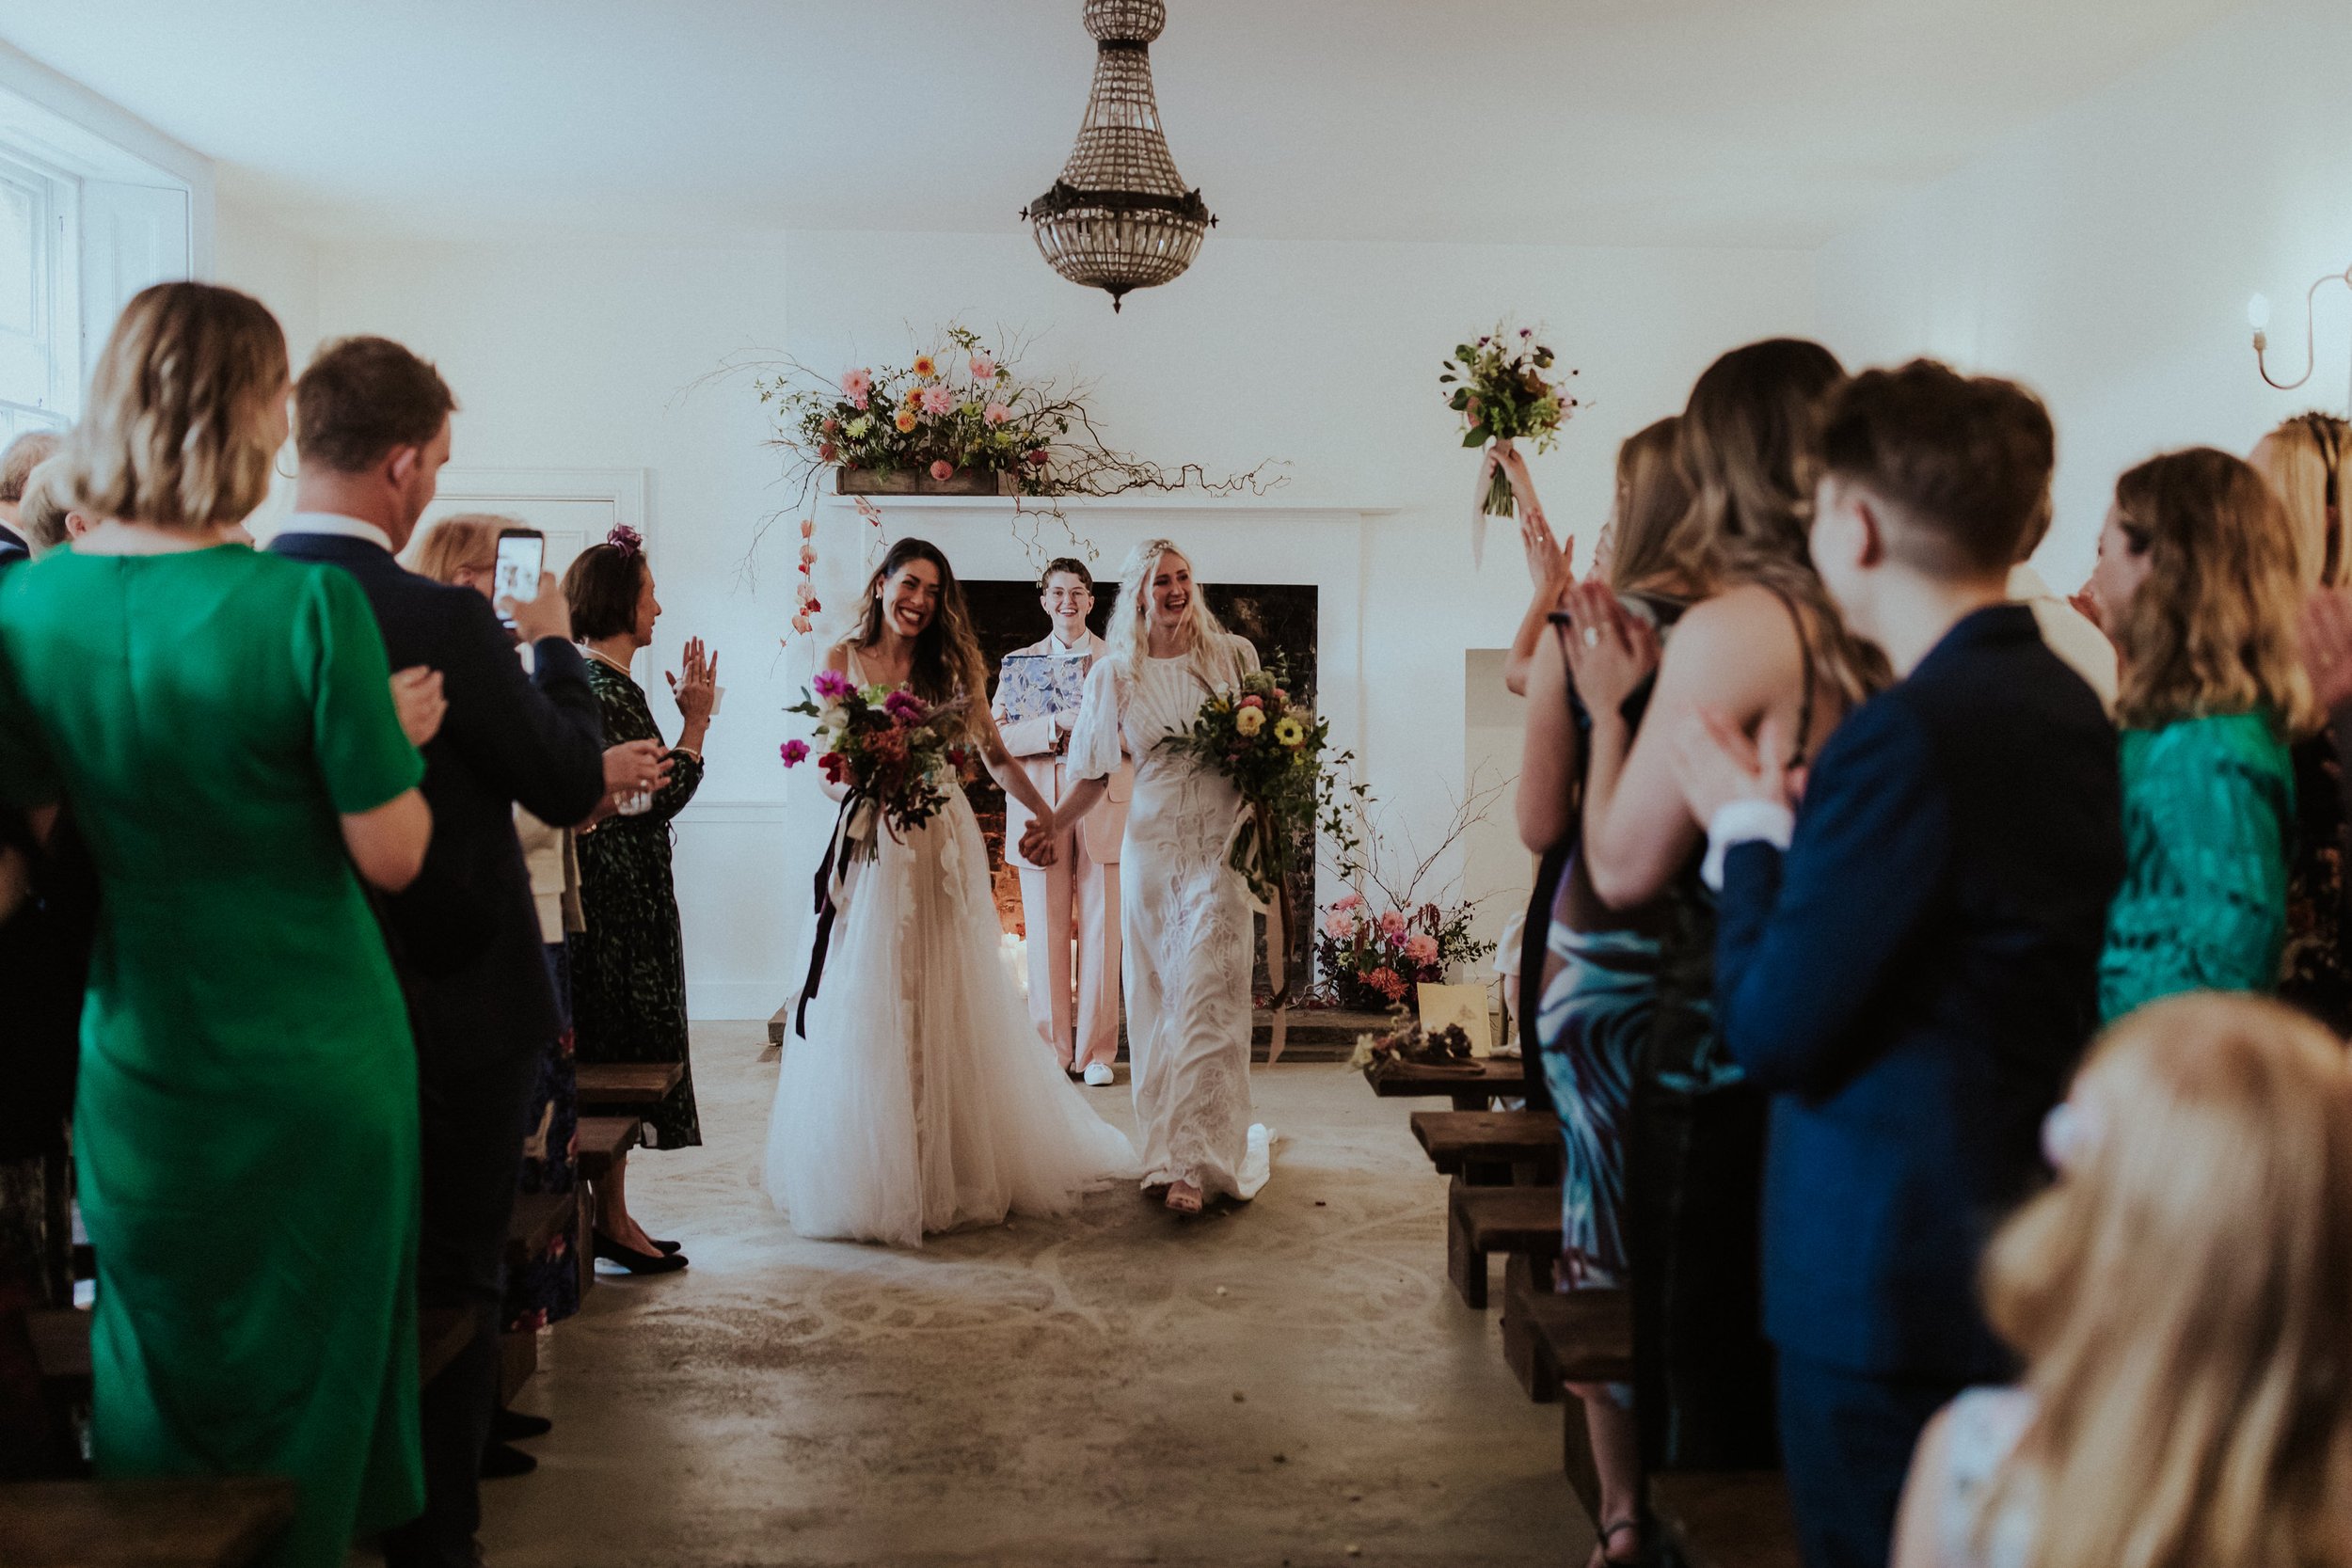  The modern, inclusive celebrant is captured stood behind the brides, smiling after delivering a fun and warm hearted wedding ceremony for the couple.  The smiling newlyweds are holding hands as they walk down the aisle past their wedding guests.  Ph